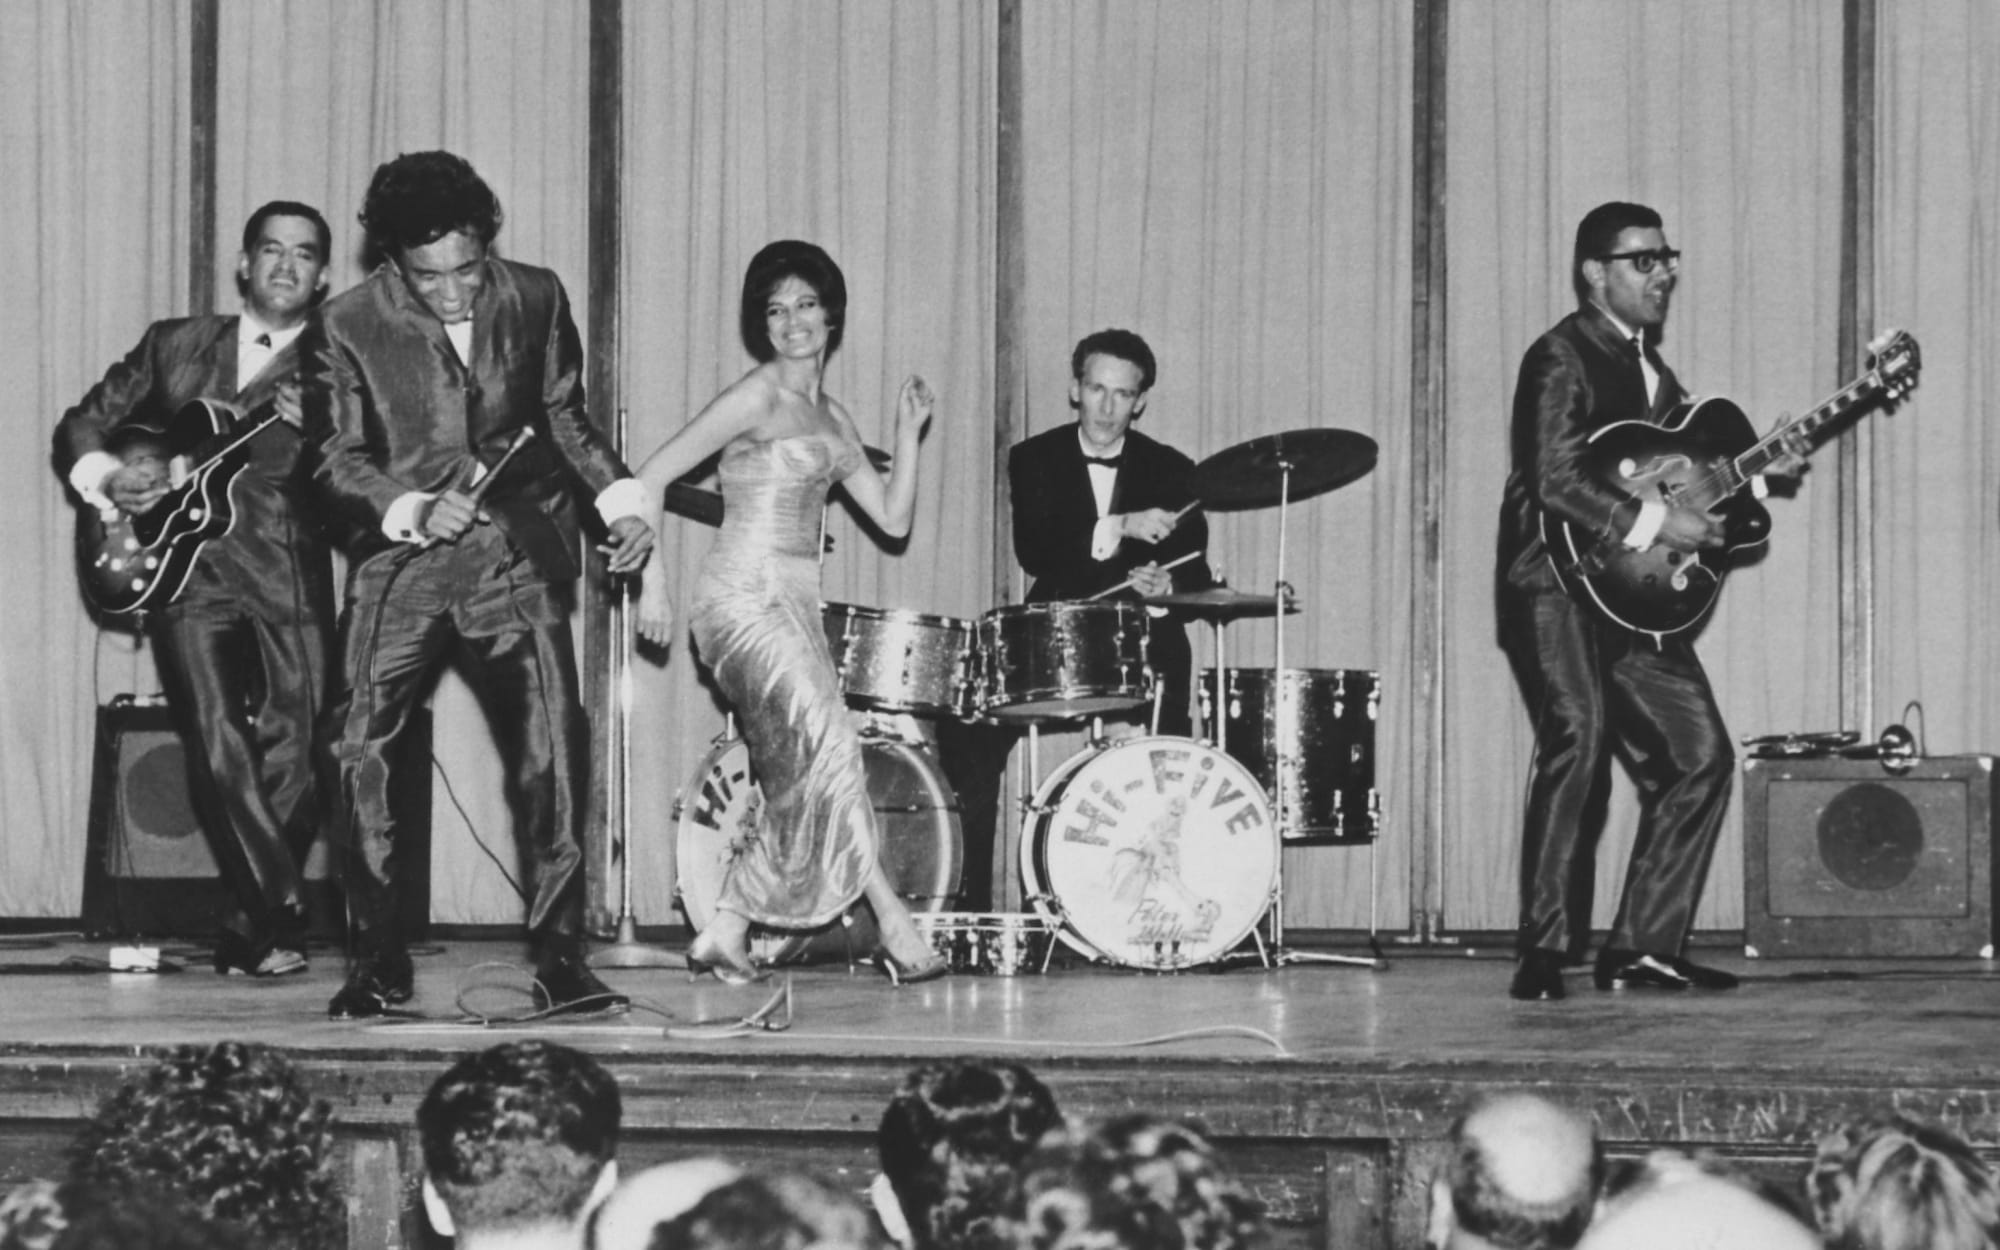 The Hi-Fives perform at the Wellington Town Hall in 1963 after returning from an international tour. From left: Kawana Pohe (saxophone), Paddy Te Tai (guitar), Solomon Pohatu (microphone), Mere Nimmo (singer), Peter Wolland (drums), Rob Hemi (guitar) and Wes Epae (bass).